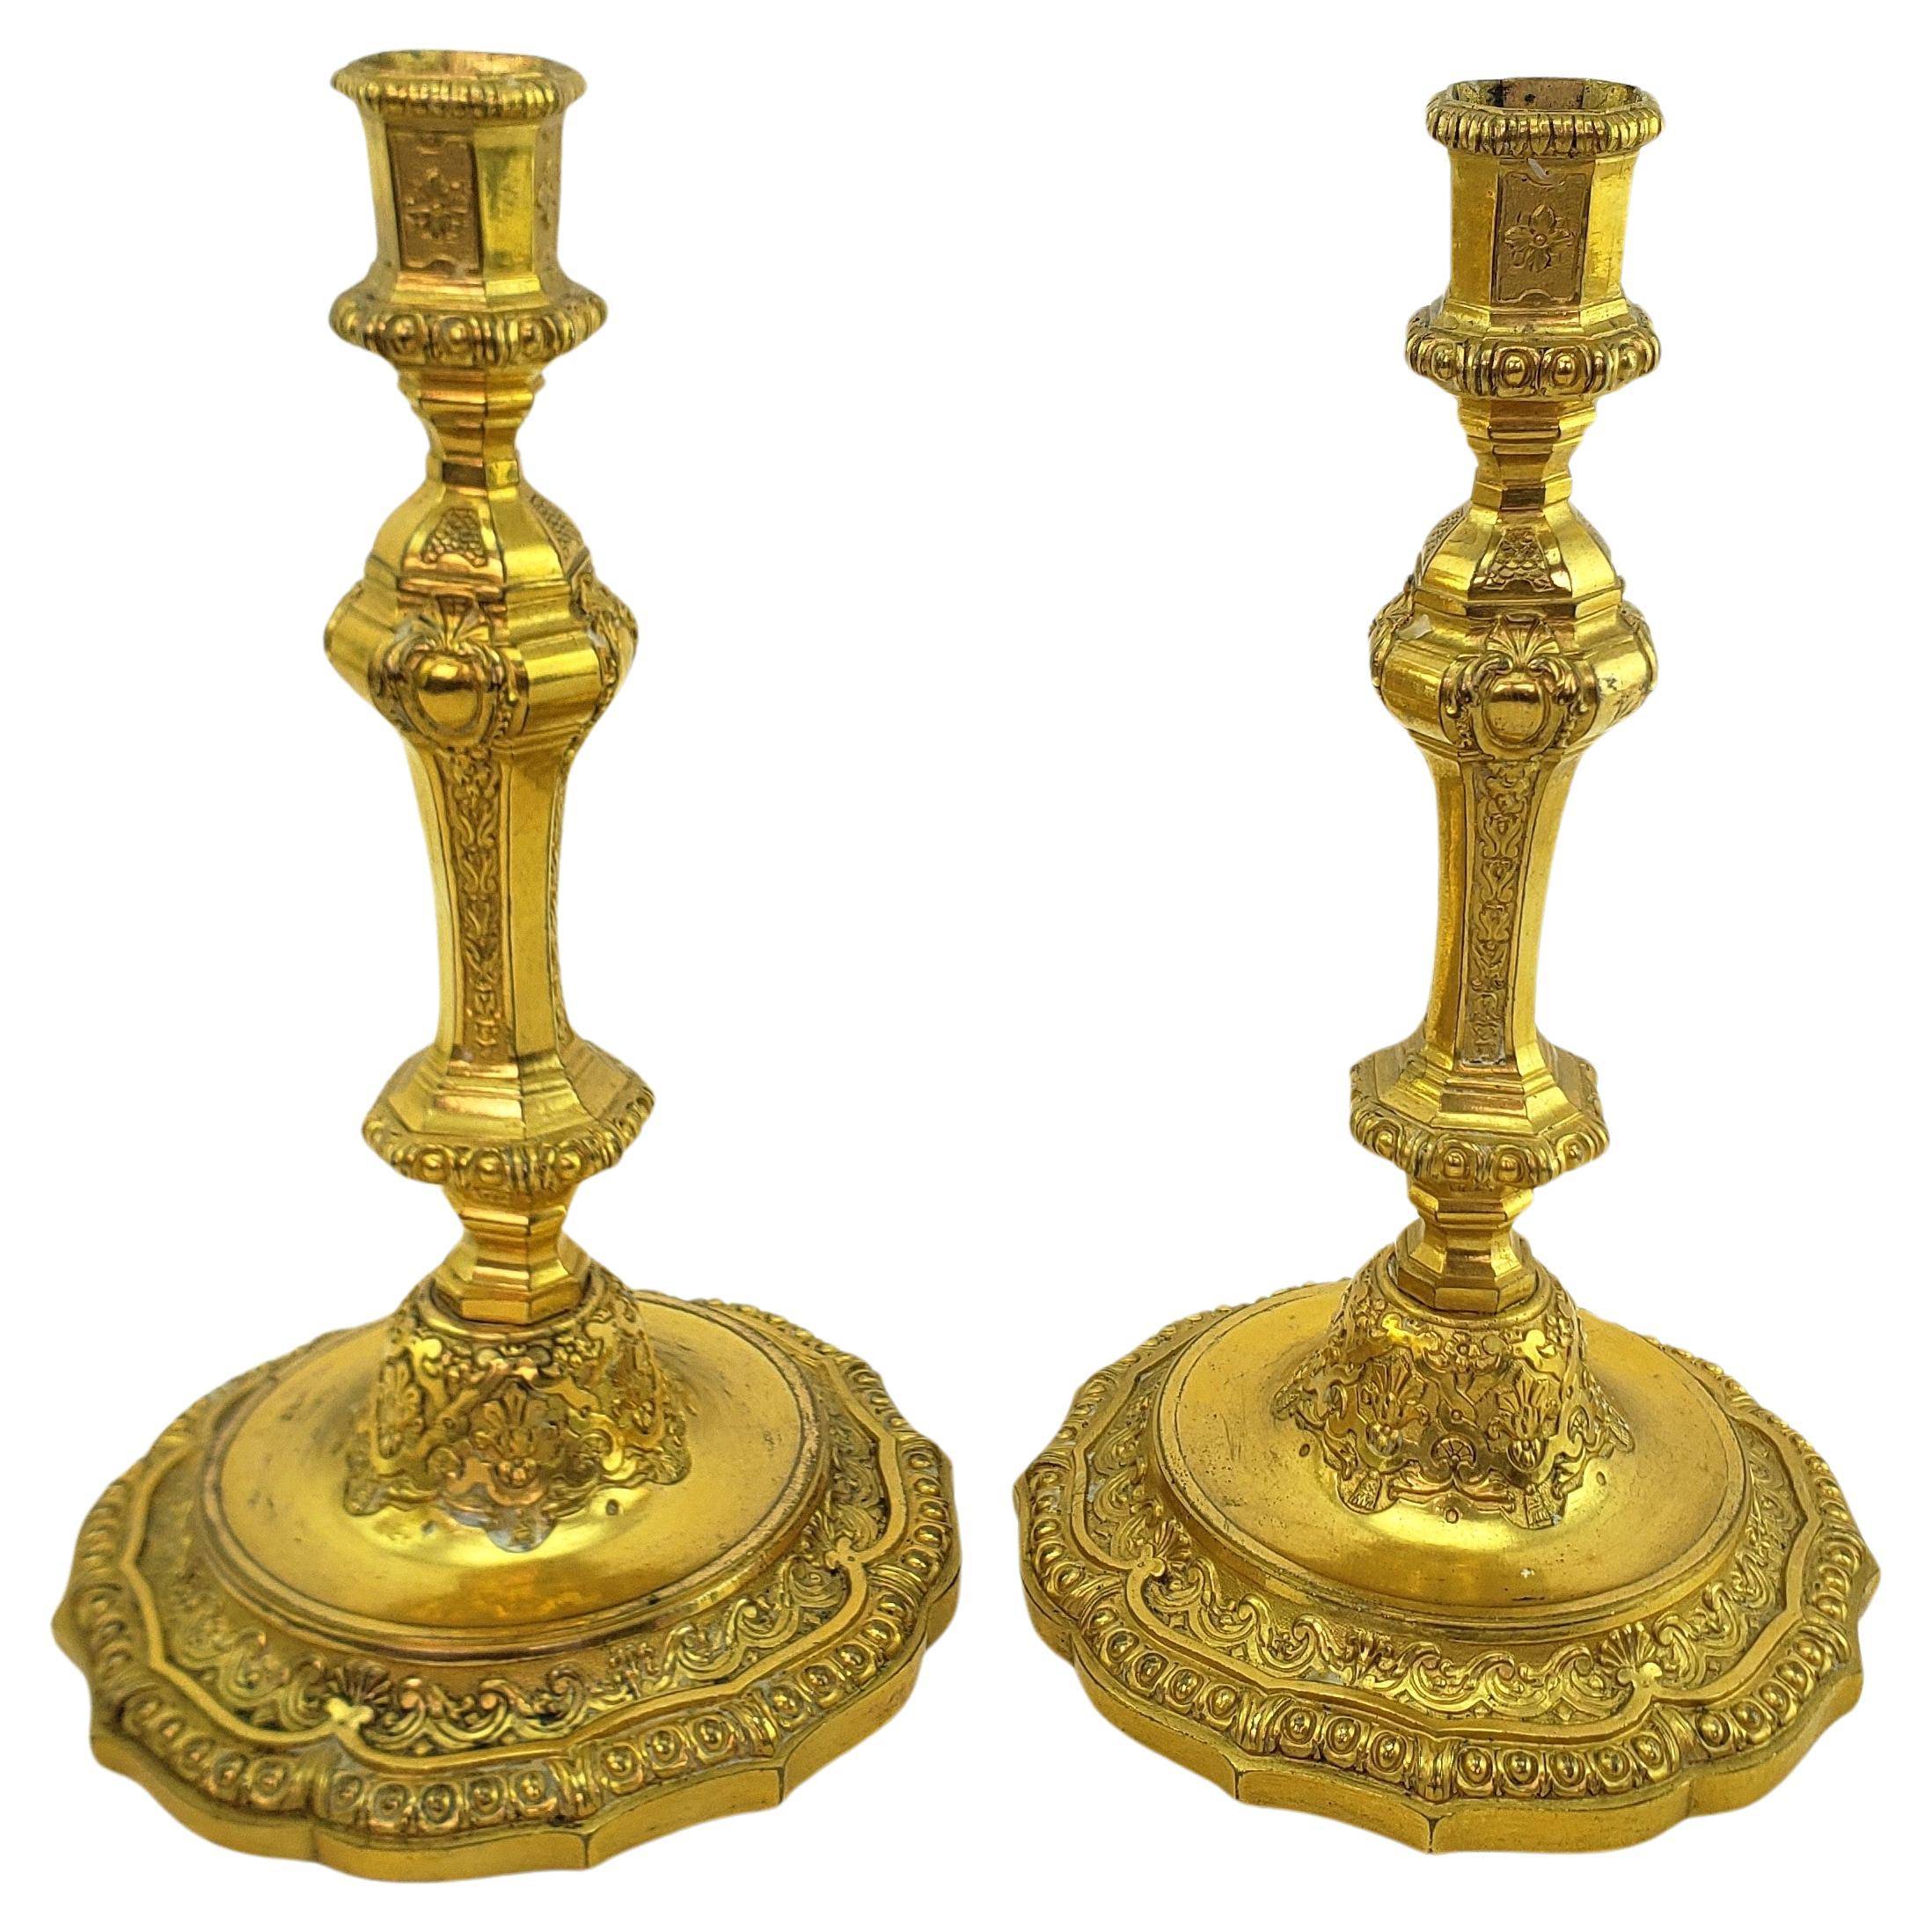 Pair of Antique Louis XIV Styled Gilt Bronze Candlesticks with Stylized Flowers For Sale